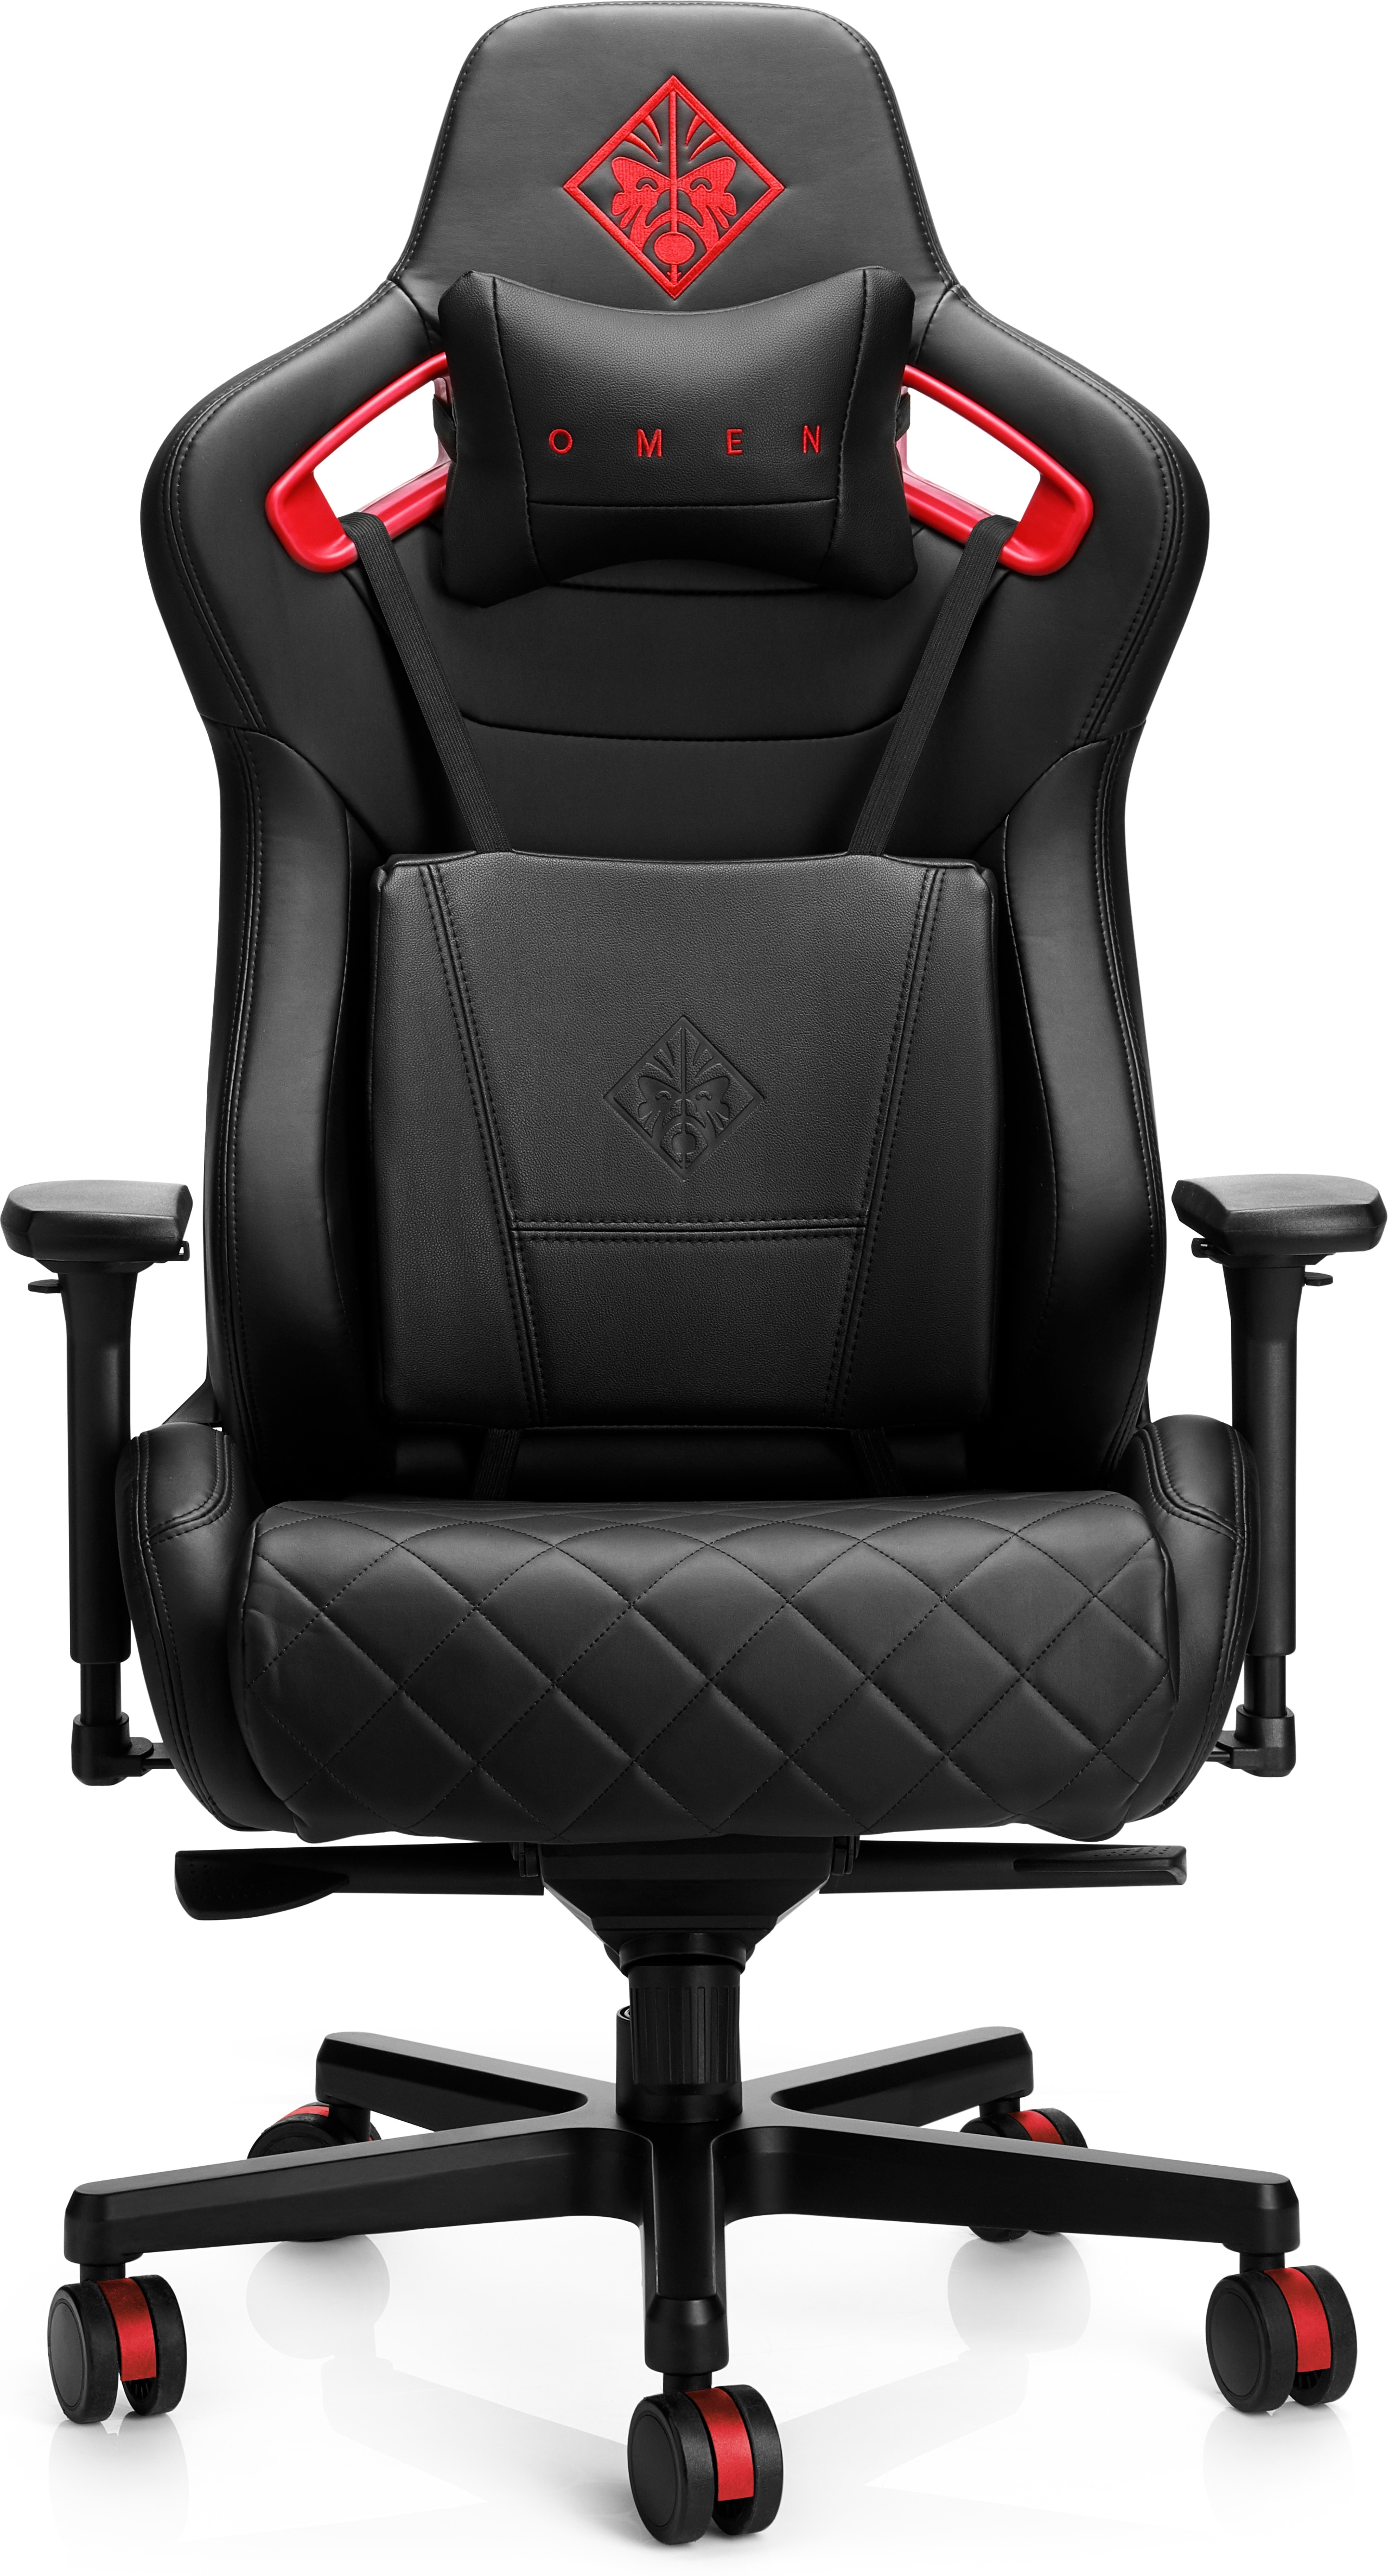 Hp Omen Gaming Chair 6ky97aa#000 6ky97aa - WC01